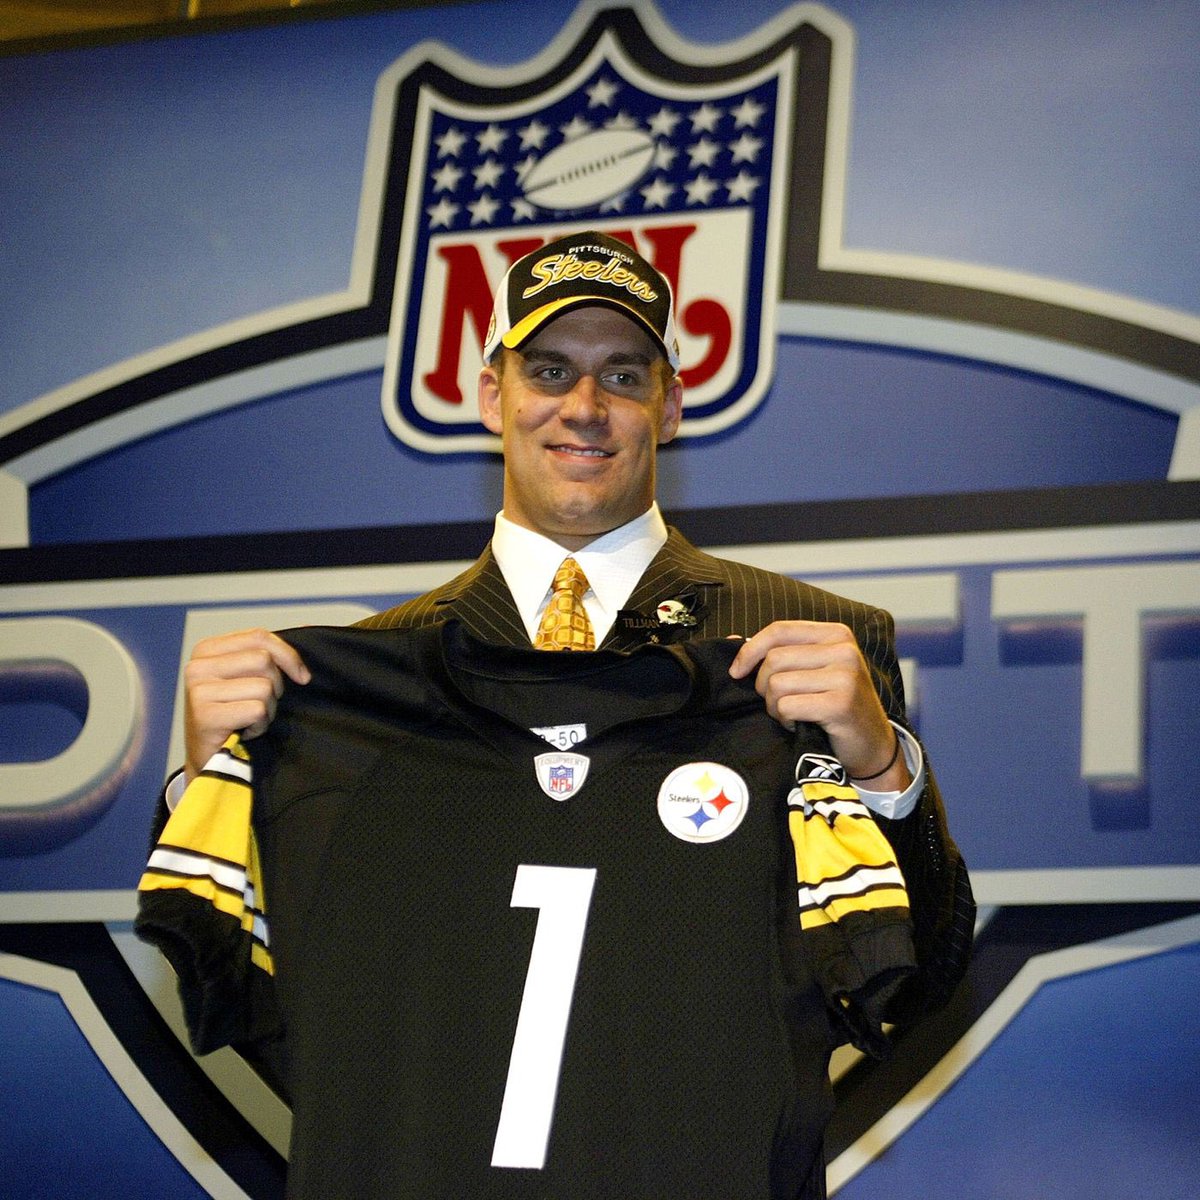 20 years ago today, the Steelers drafted a QB from Miami (OH) with the 11th overall pick.